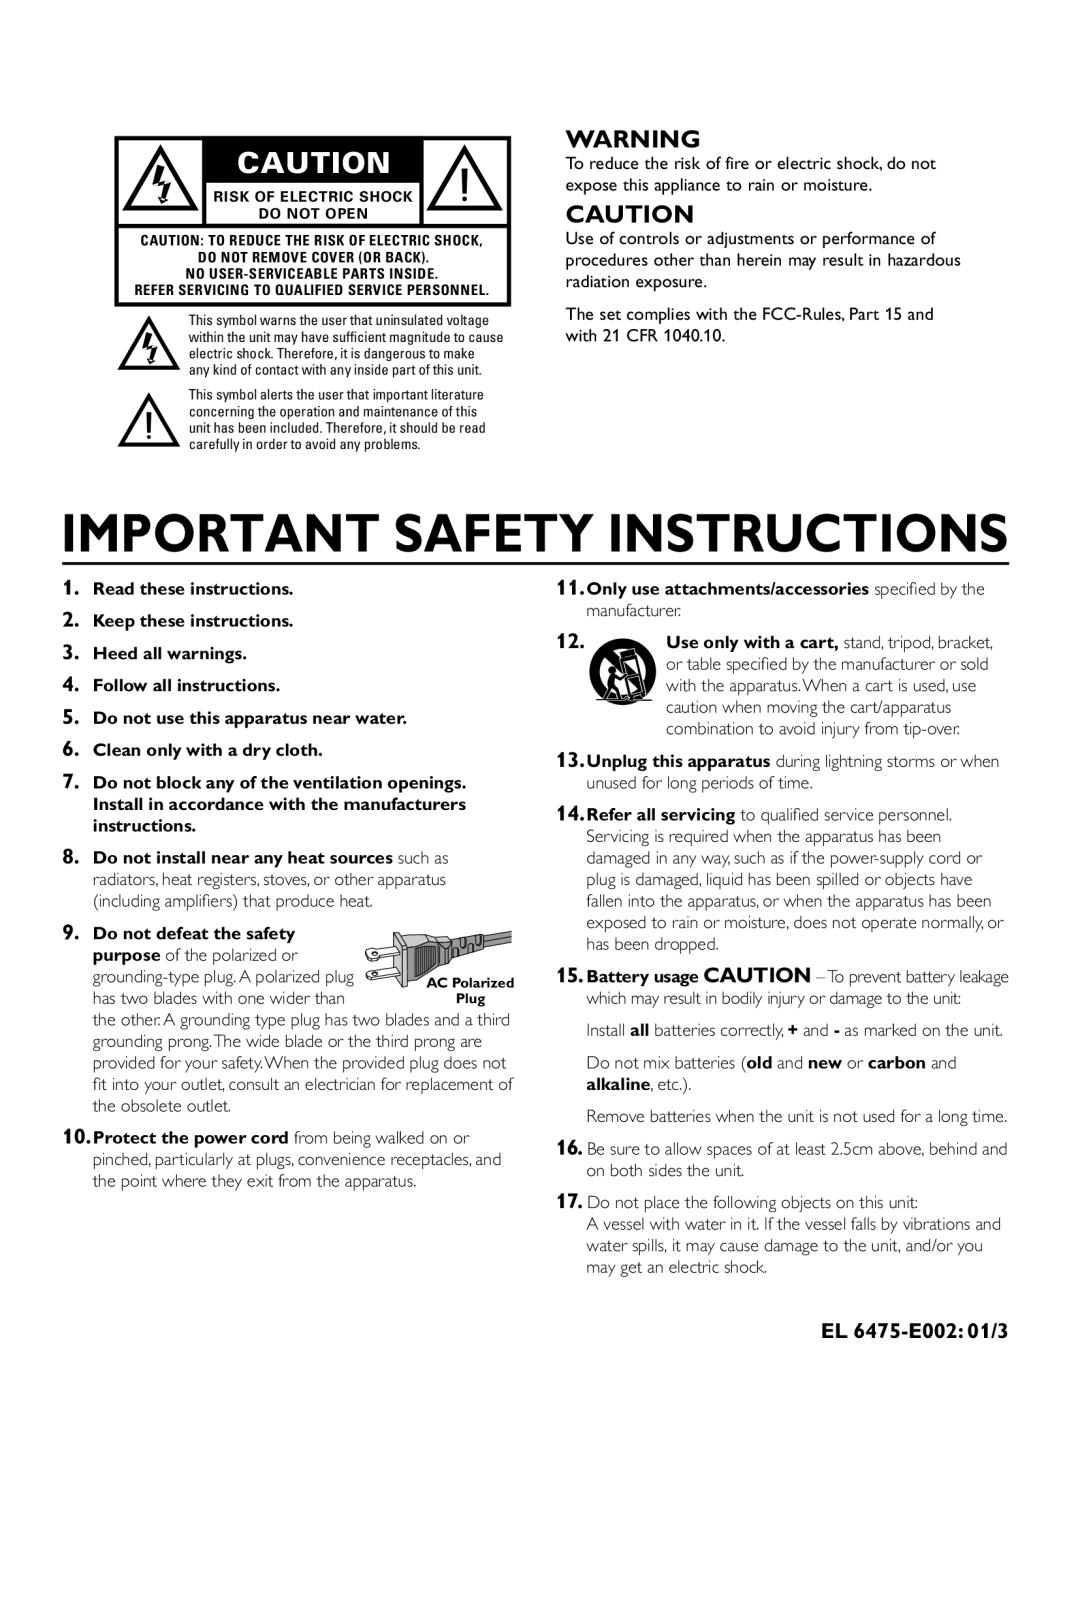 Yamaha HTR-5630RDS Important Safety Instructions, EL 6475-E002 01/3, Read these instructions 2. Keep these instructions 